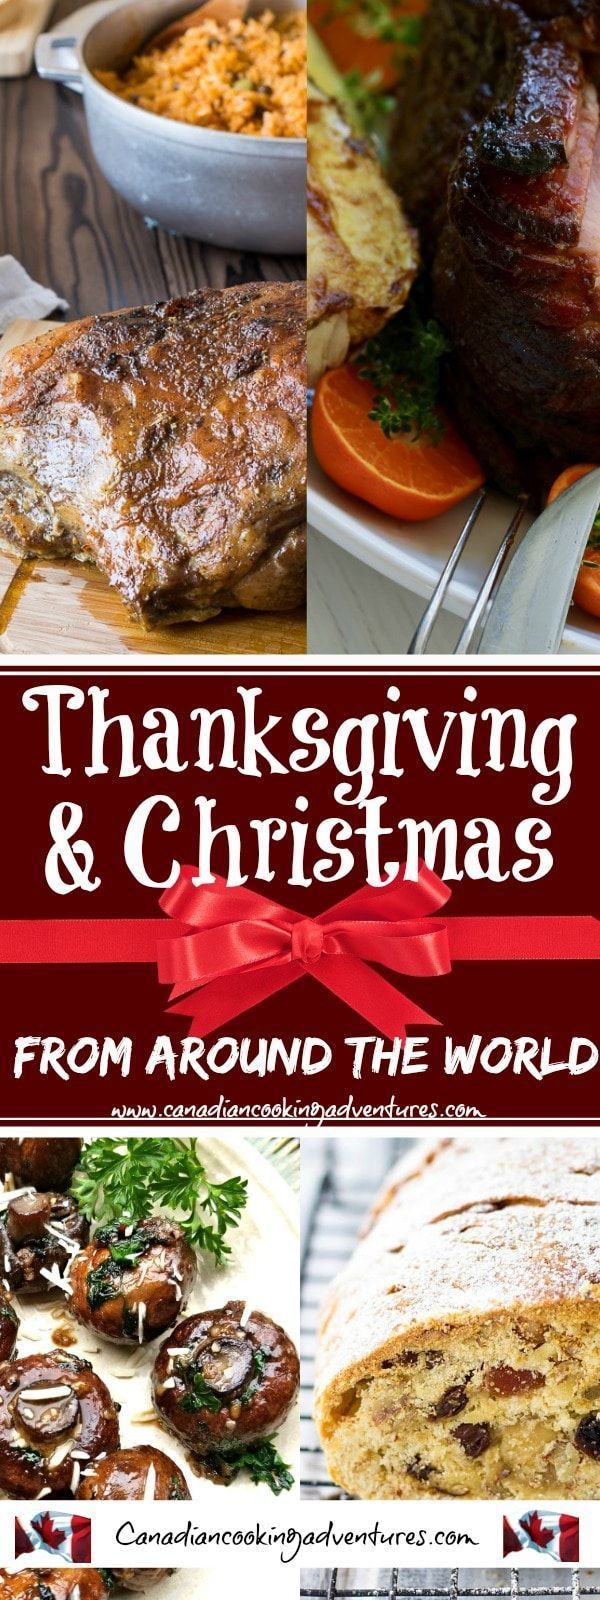 25 Thanksgiving and Christmas recipes from around the World -   16 international christmas recipes
 ideas